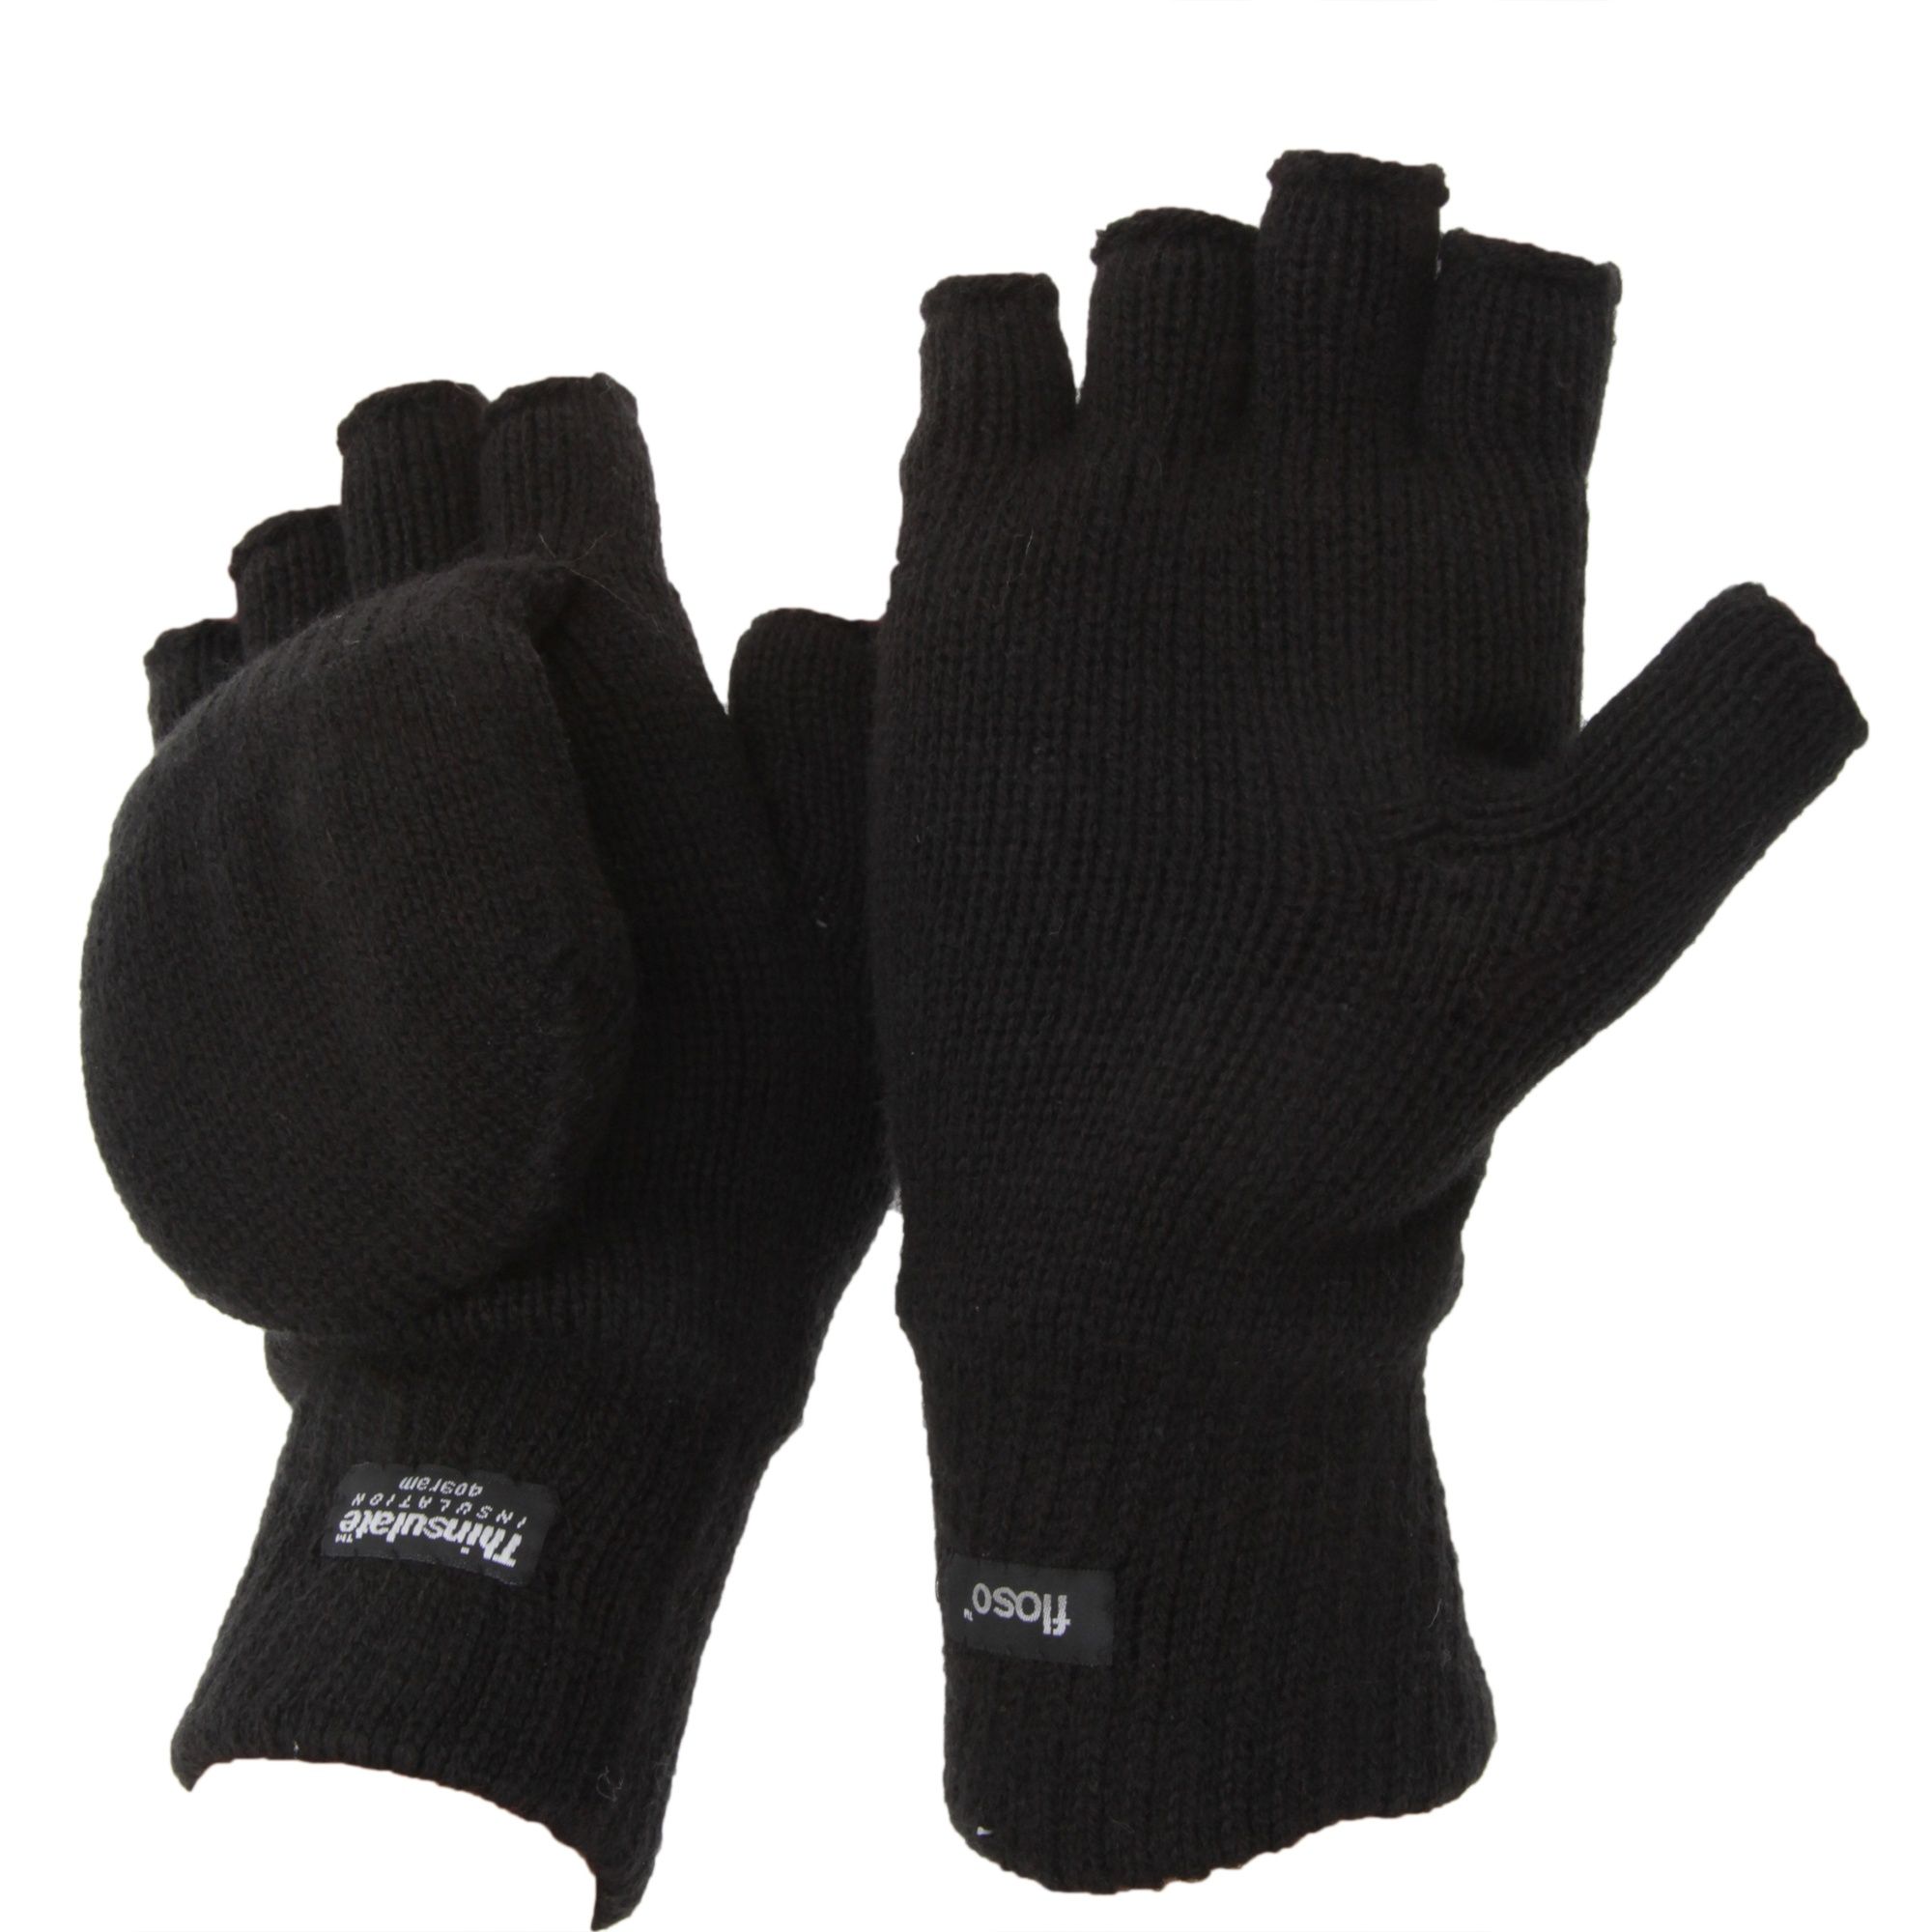 Great quality gloves. Fibre: shell 100% Acrylic. Lining 100% Polyester. Hand wash only. Ideal for wearing in the cold weather. Keeps your hands nice and warm. The gloves are capped so it can be pulled over to cover the fingers.